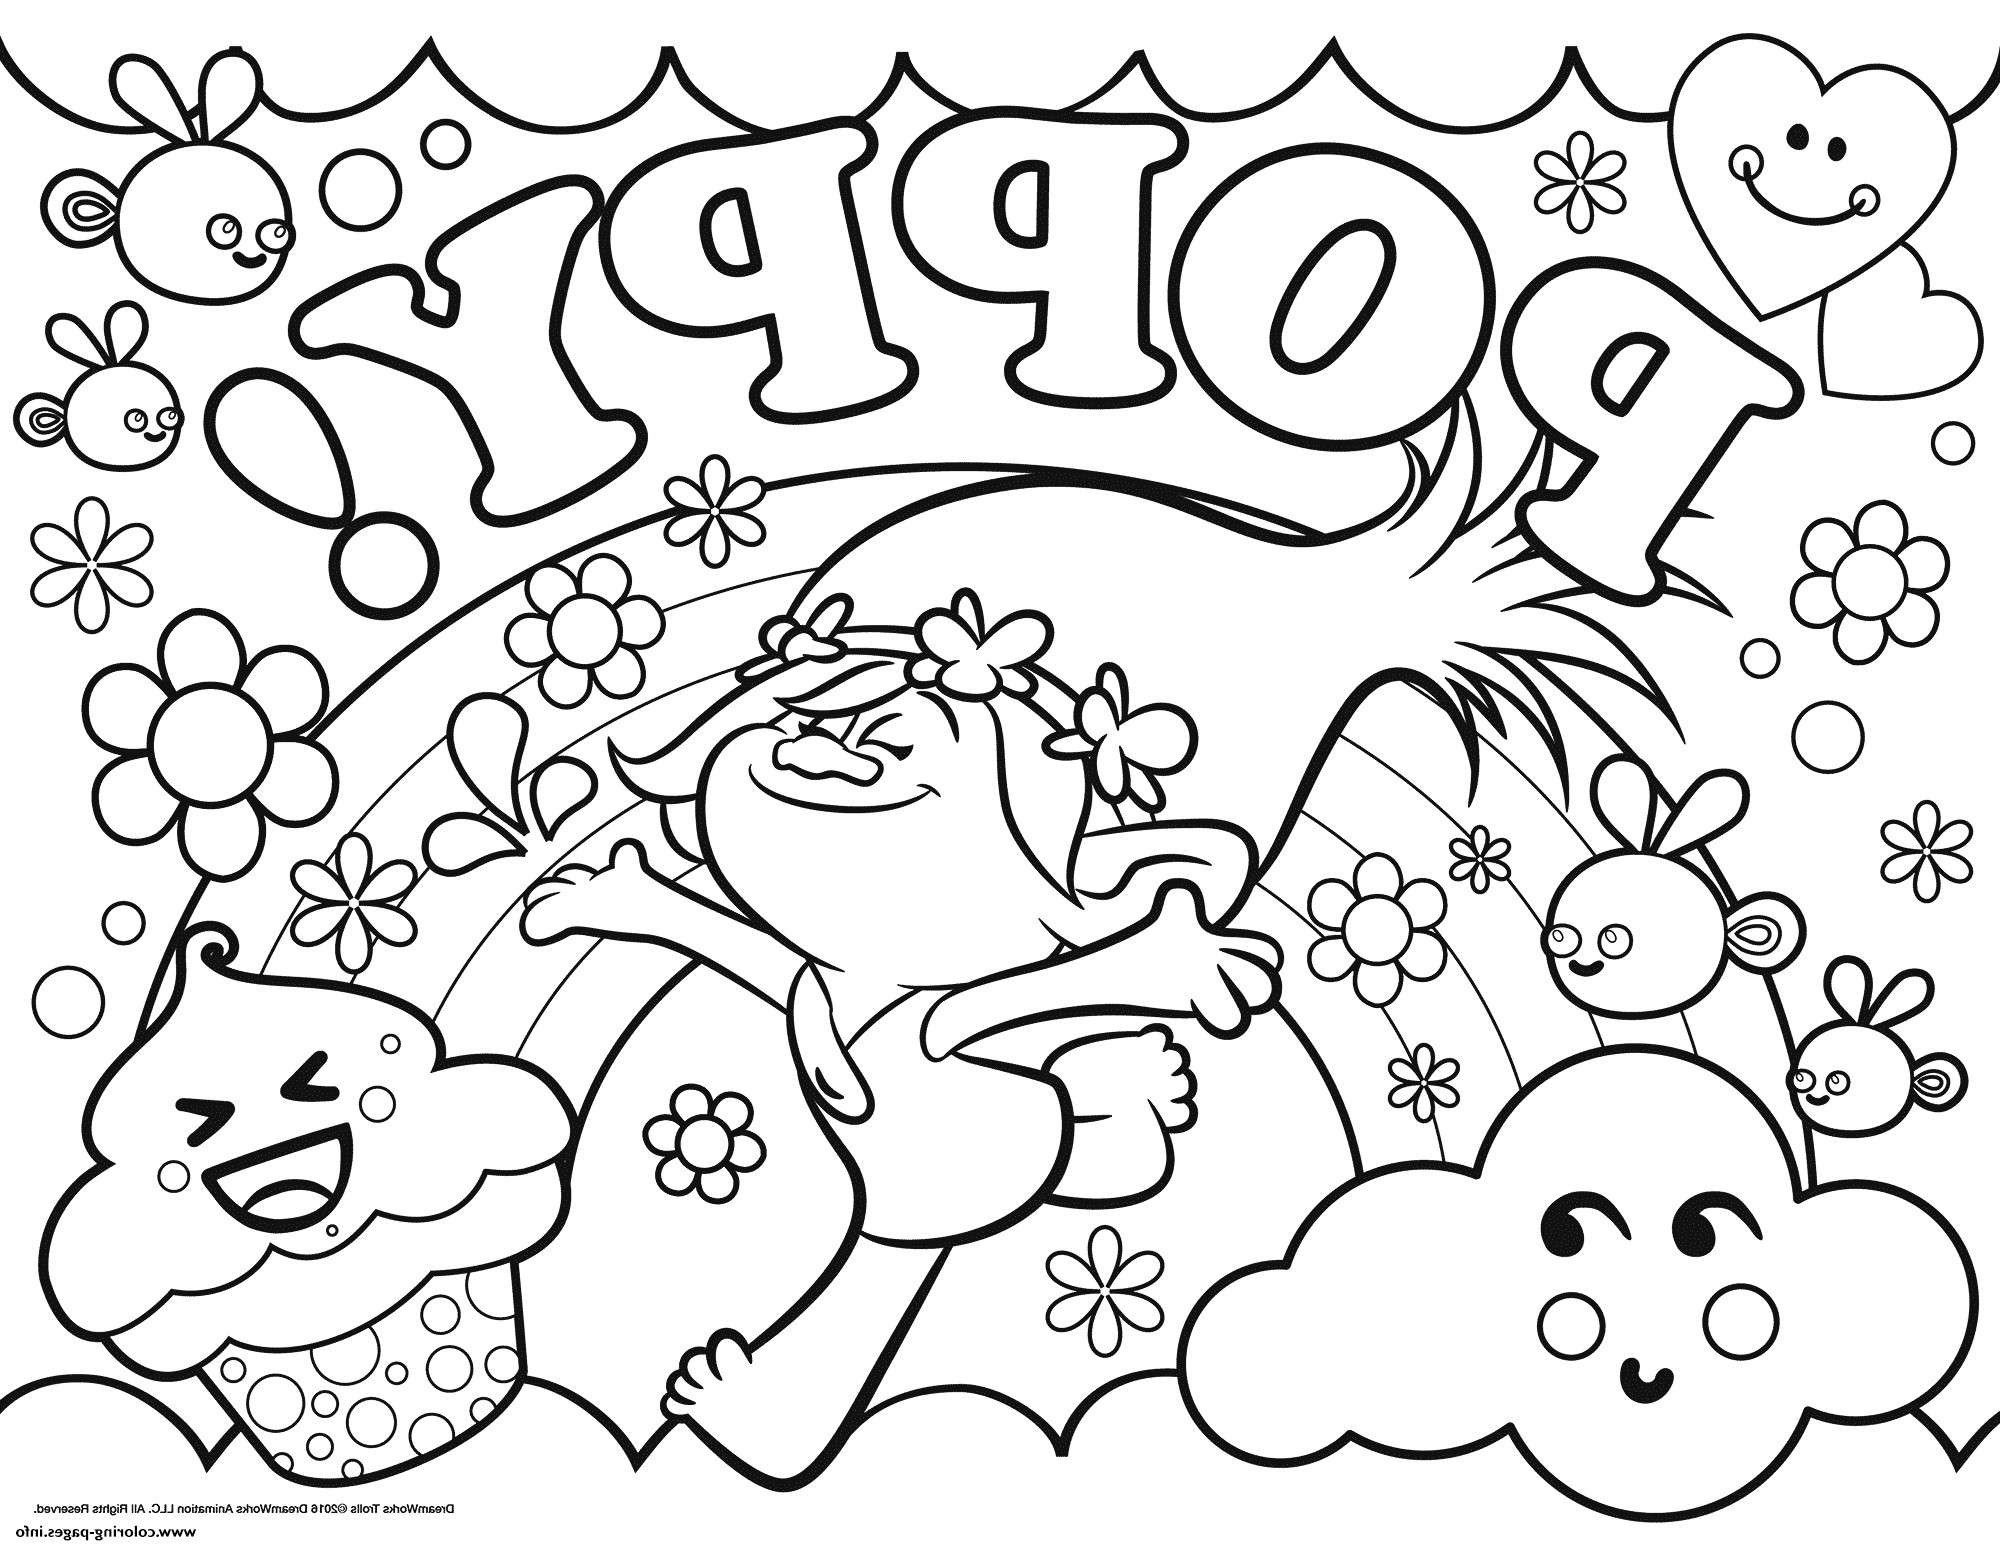 Poppy Coloring Page Outstanding Trolls Ba Poppy Coloring Pages Dreamworks -  birijus.com